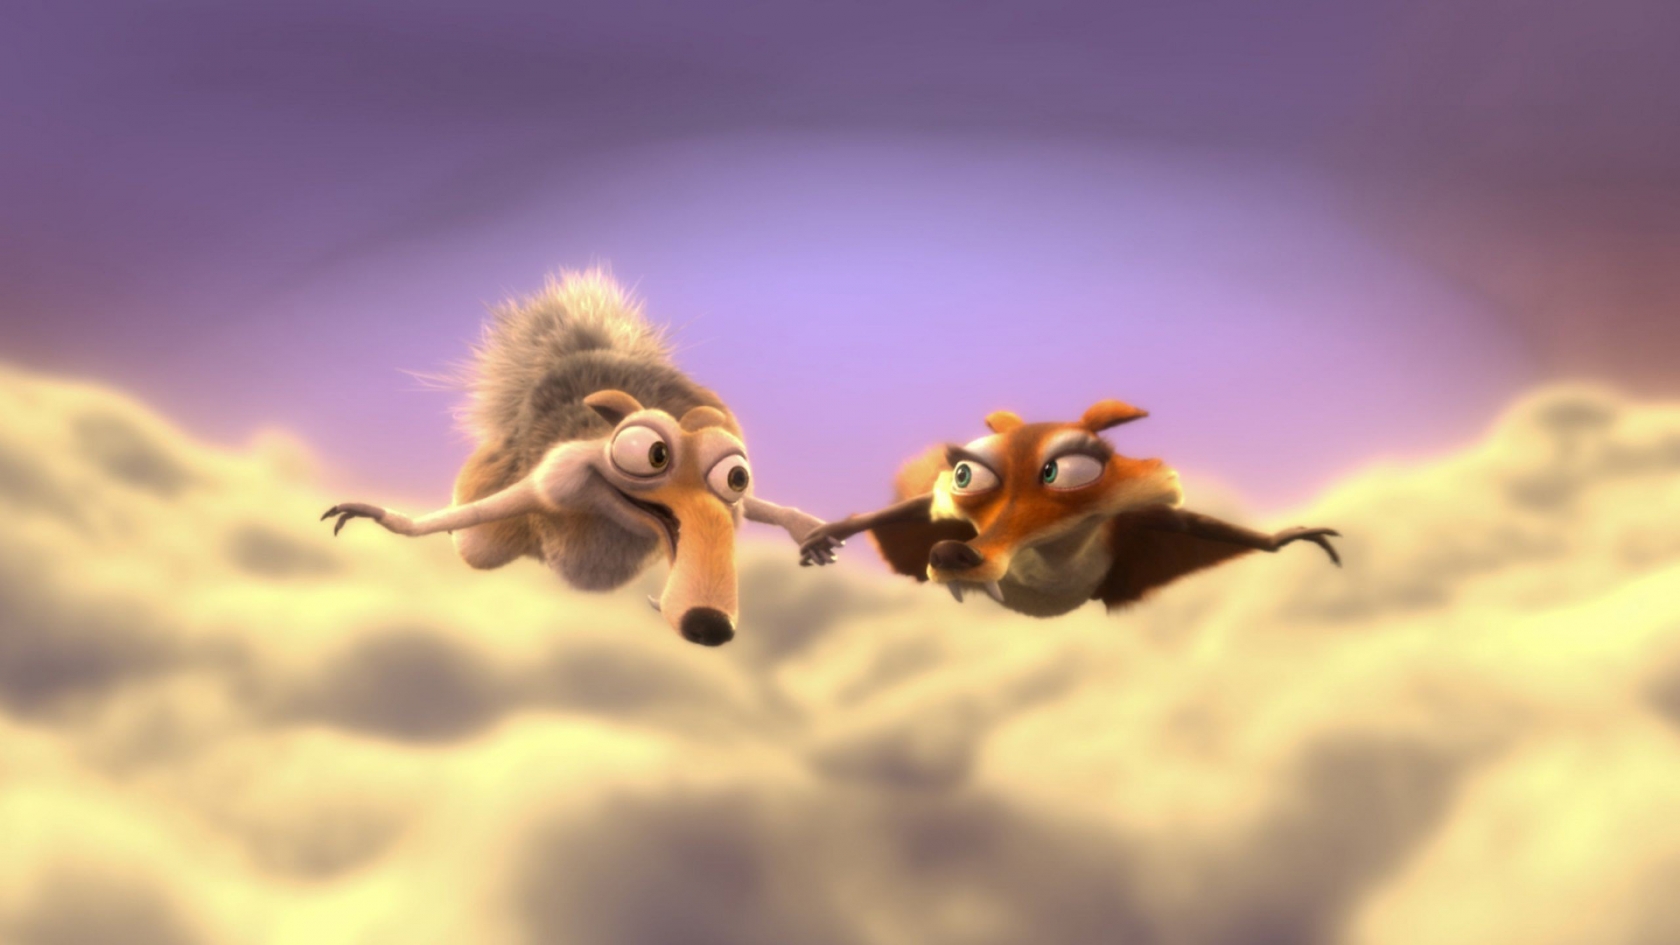 Scrat and Scratte for 1680 x 945 HDTV resolution